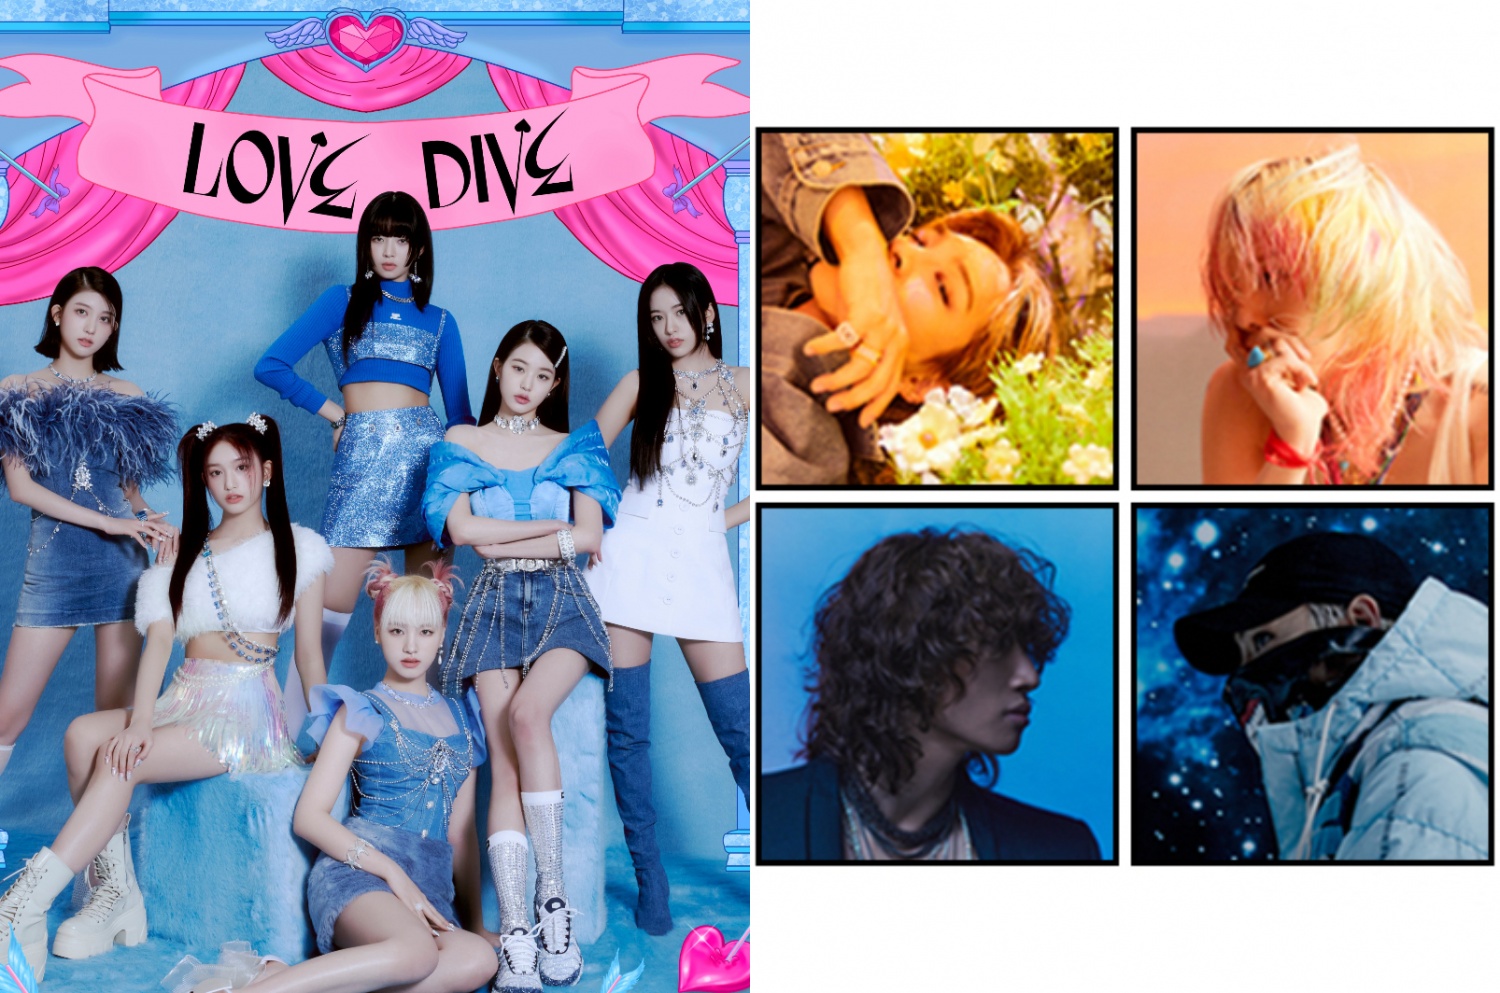 Melon Year-End Chart 2022: Here Are Korean Songs Likely To Make The Top 10